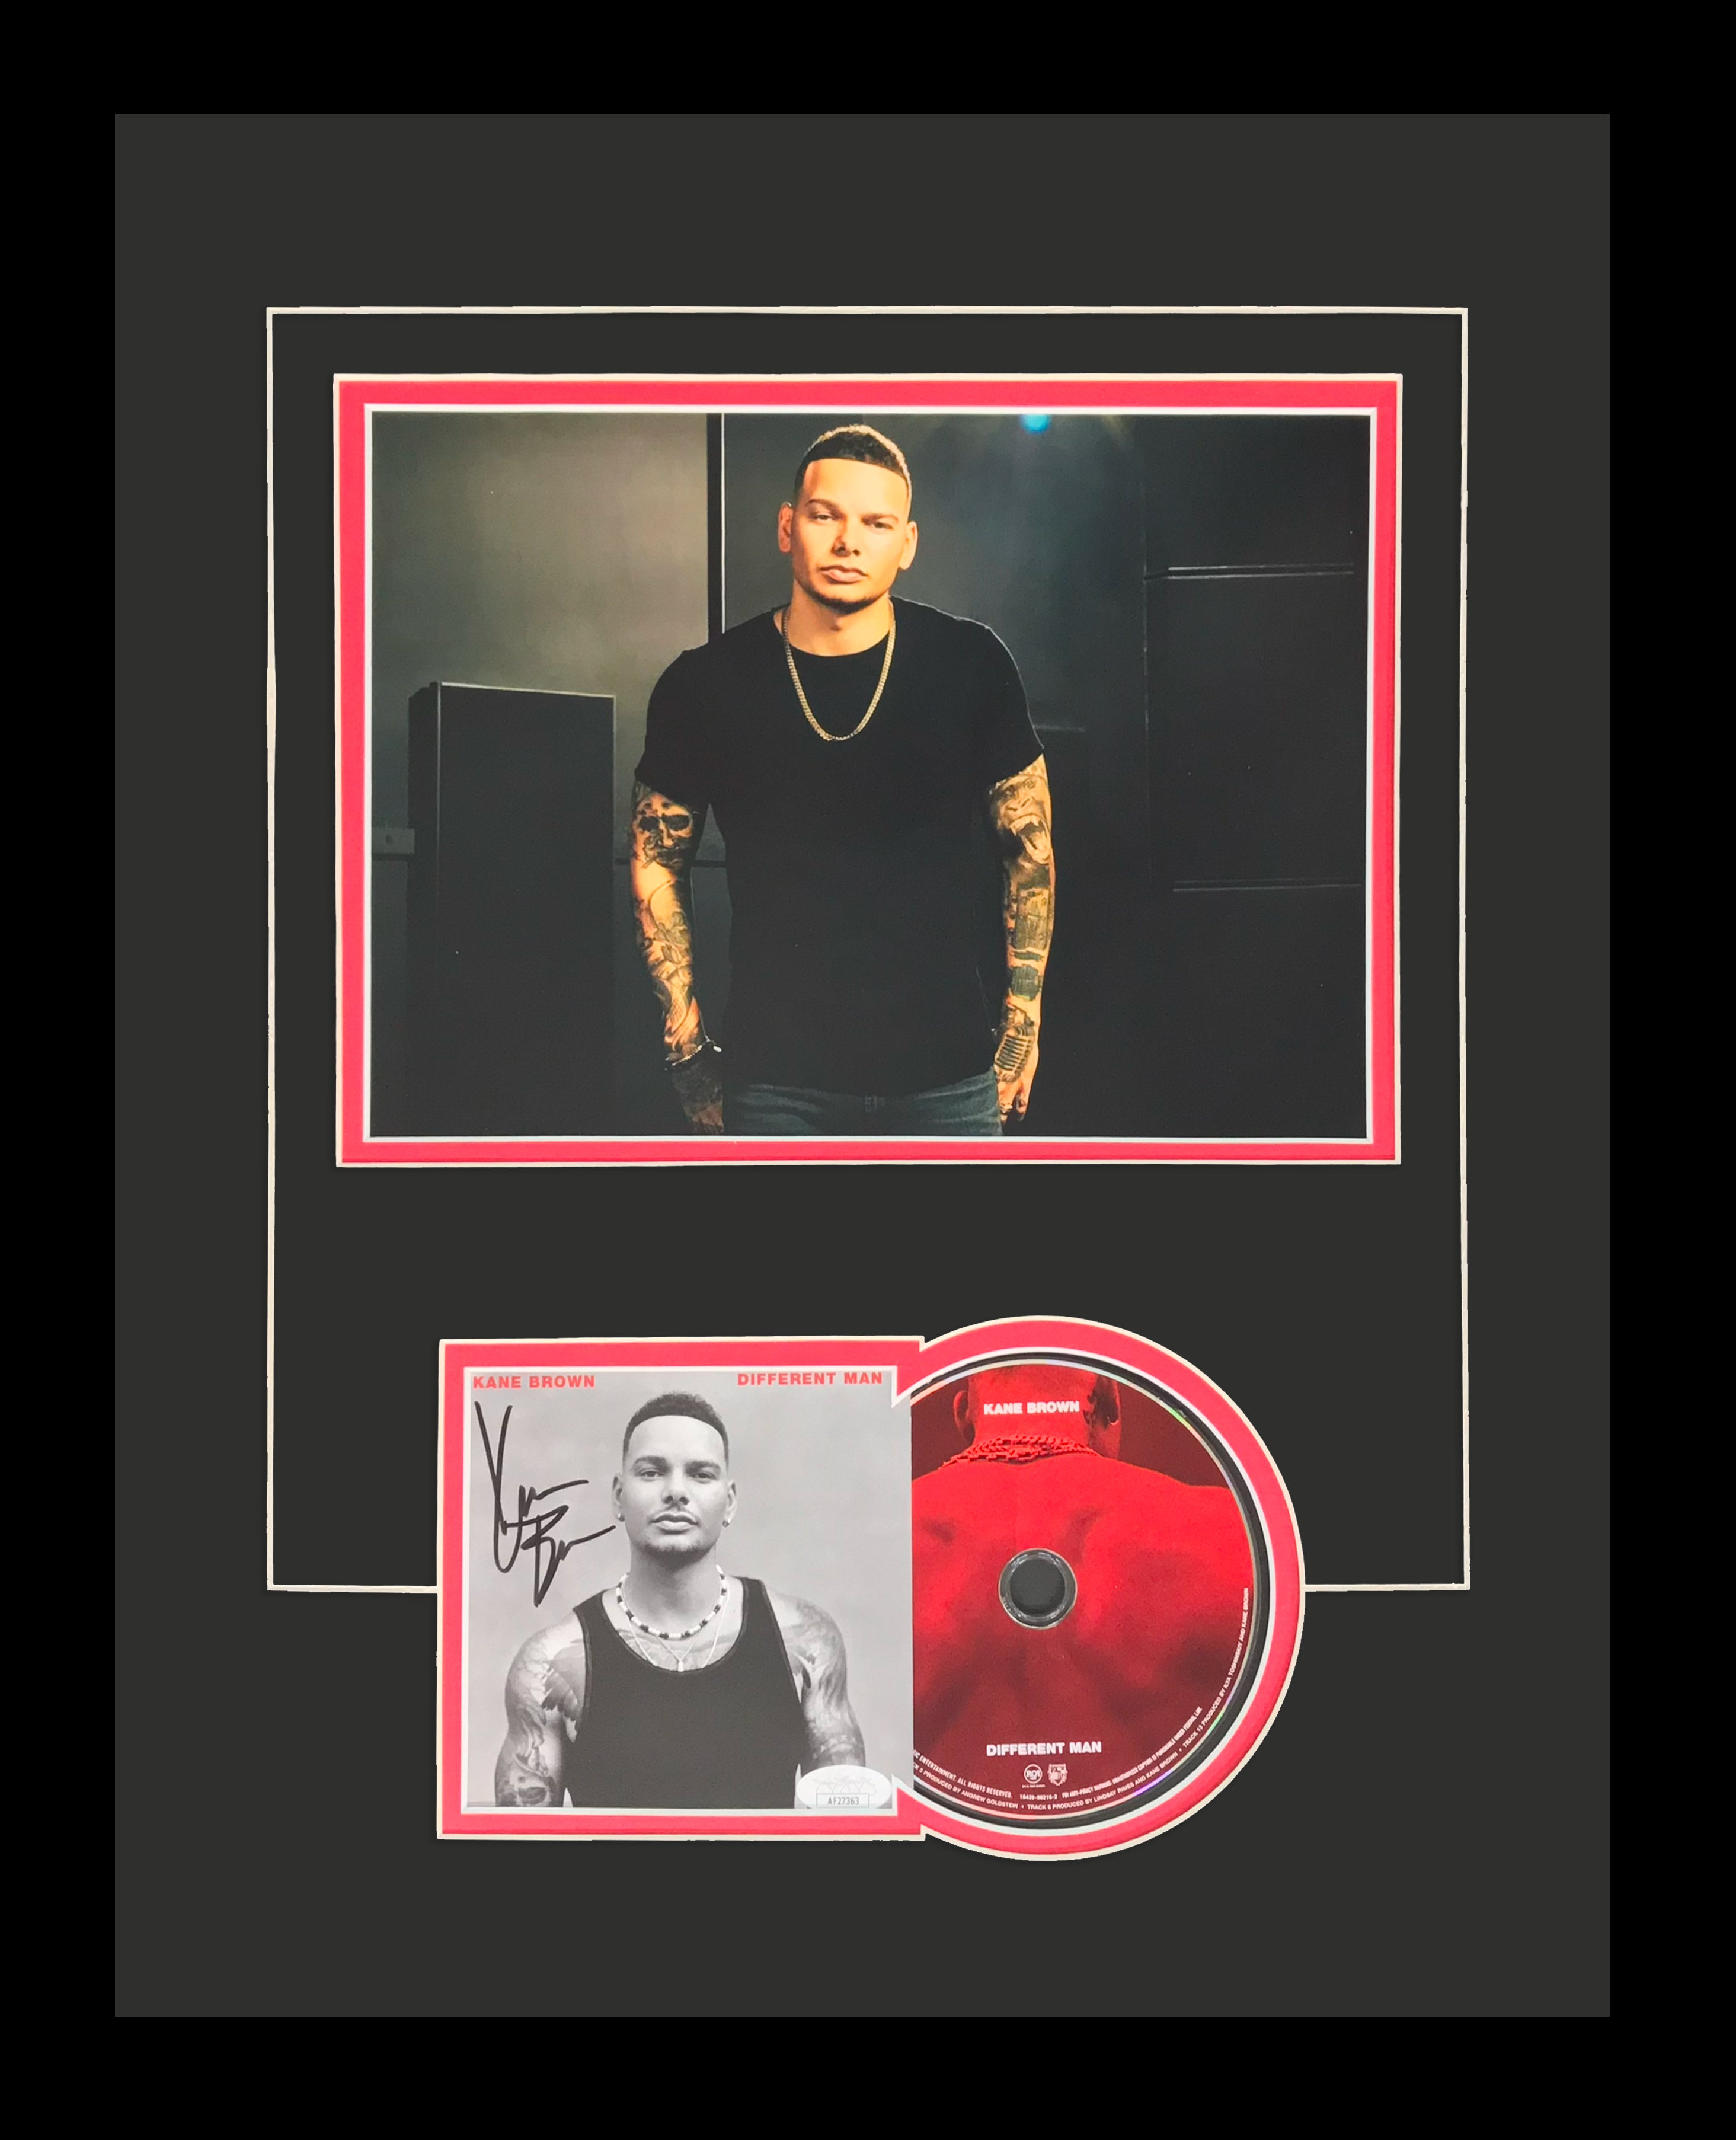 Kane Brown Autographed Different Man Deluxe Framed CD and Booklet - JSA